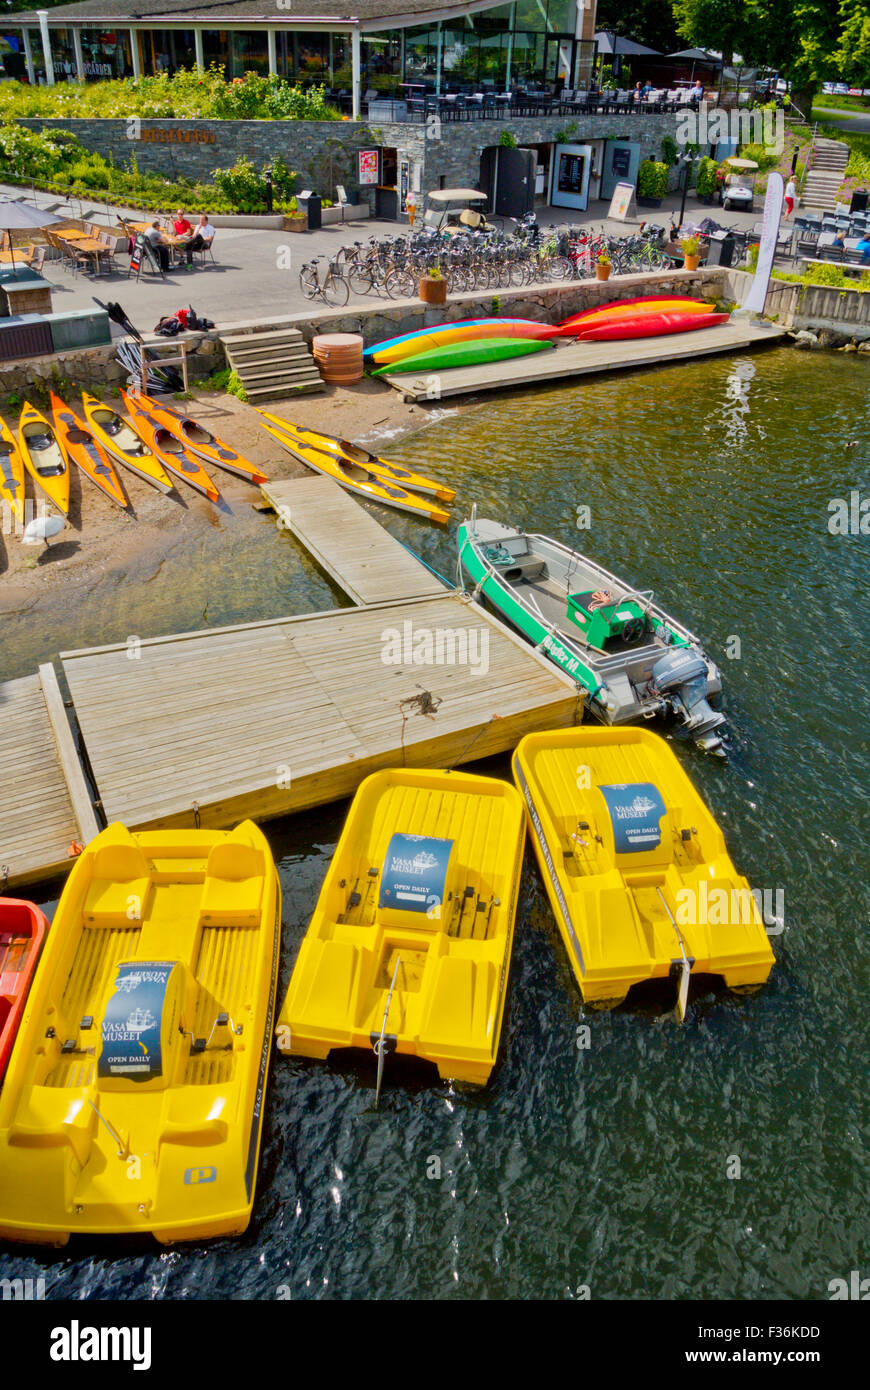 Pedalos, canoes, boats and bicycles for rent, Sjöcafeet, Djurgården island, Stockholm, Sweden Stock Photo